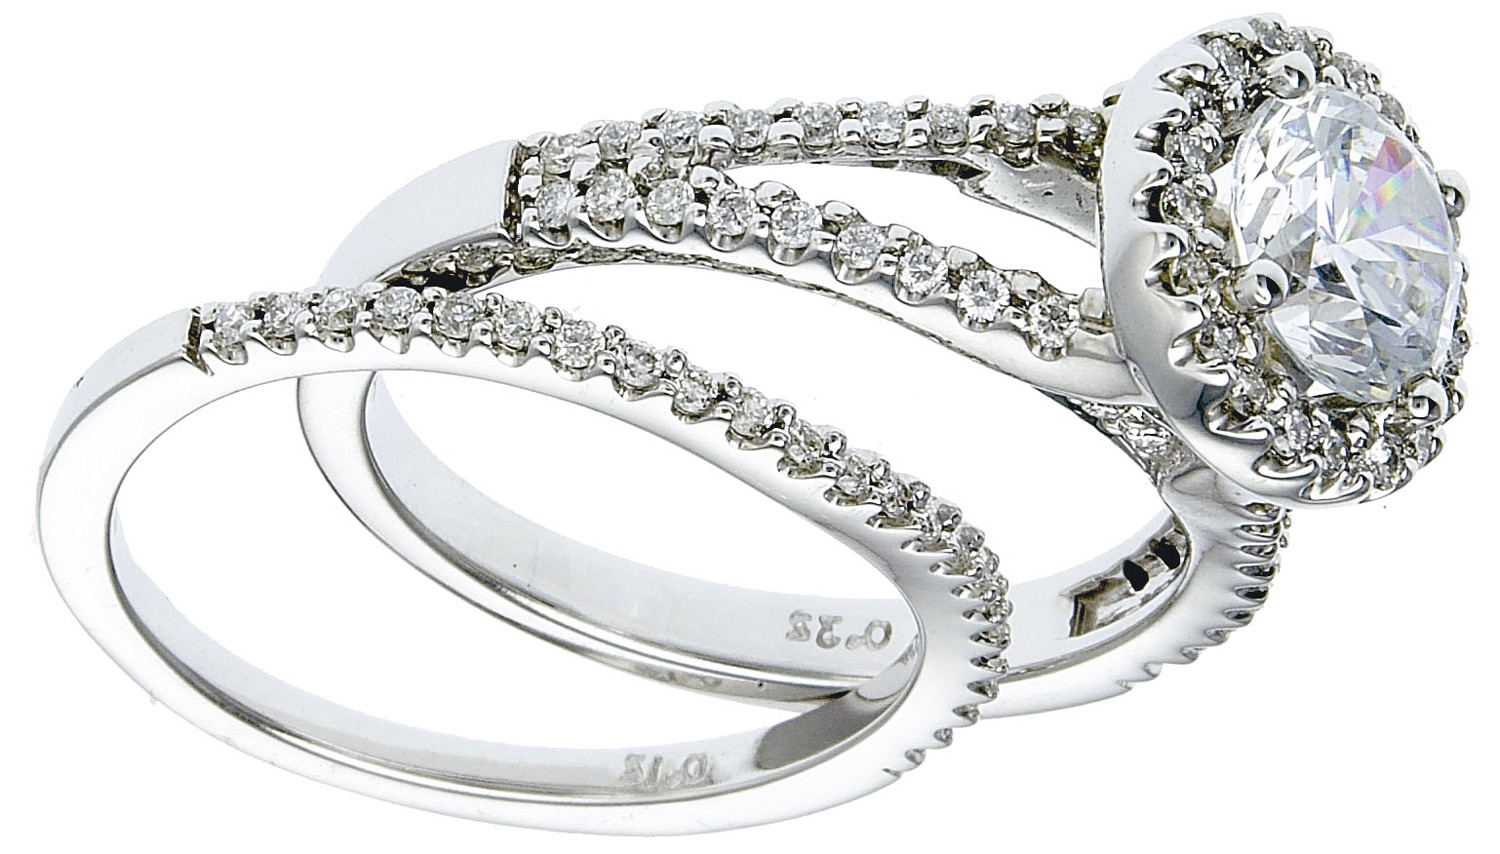 Used Wedding Ring Sets For Sale
 Engagement Rings Sale White Gold set with Diamonds